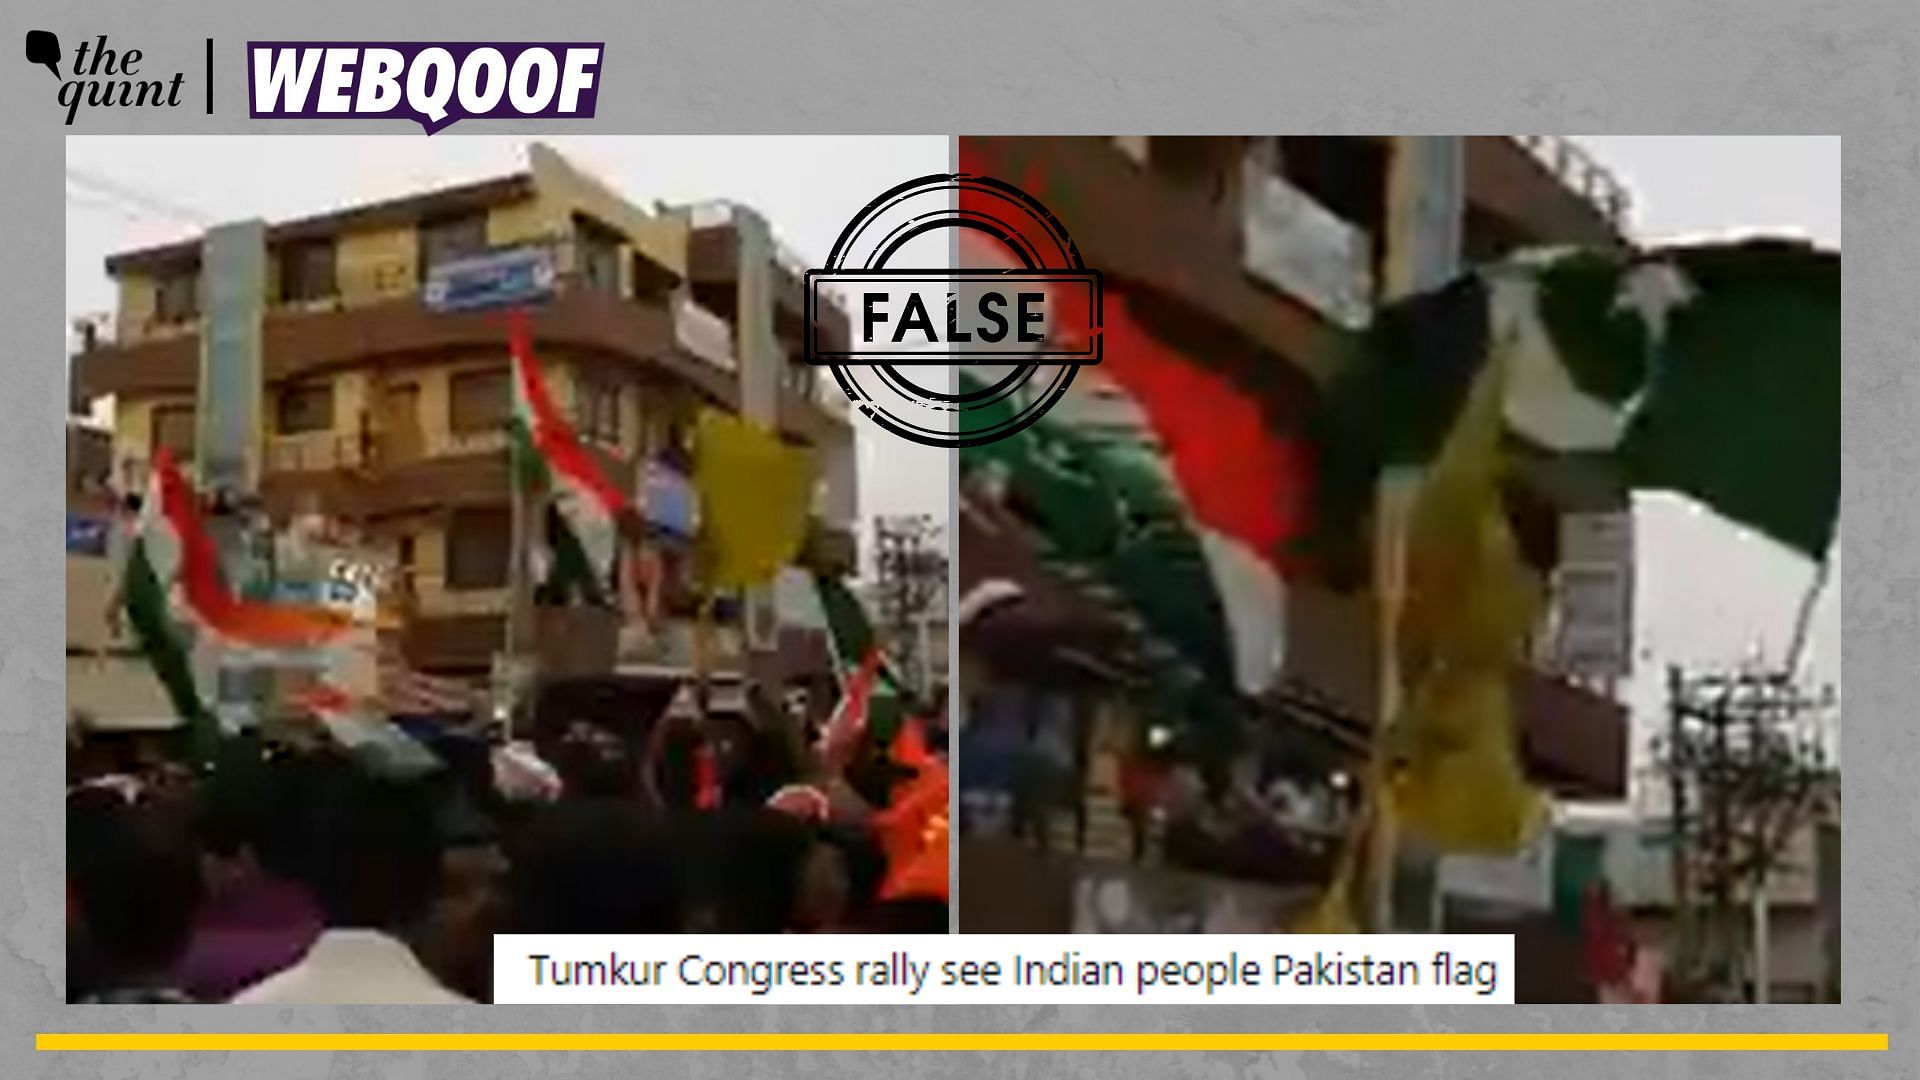 Does This Clip Show People Recently Raising Pakistan's Flags in Karnataka? No!